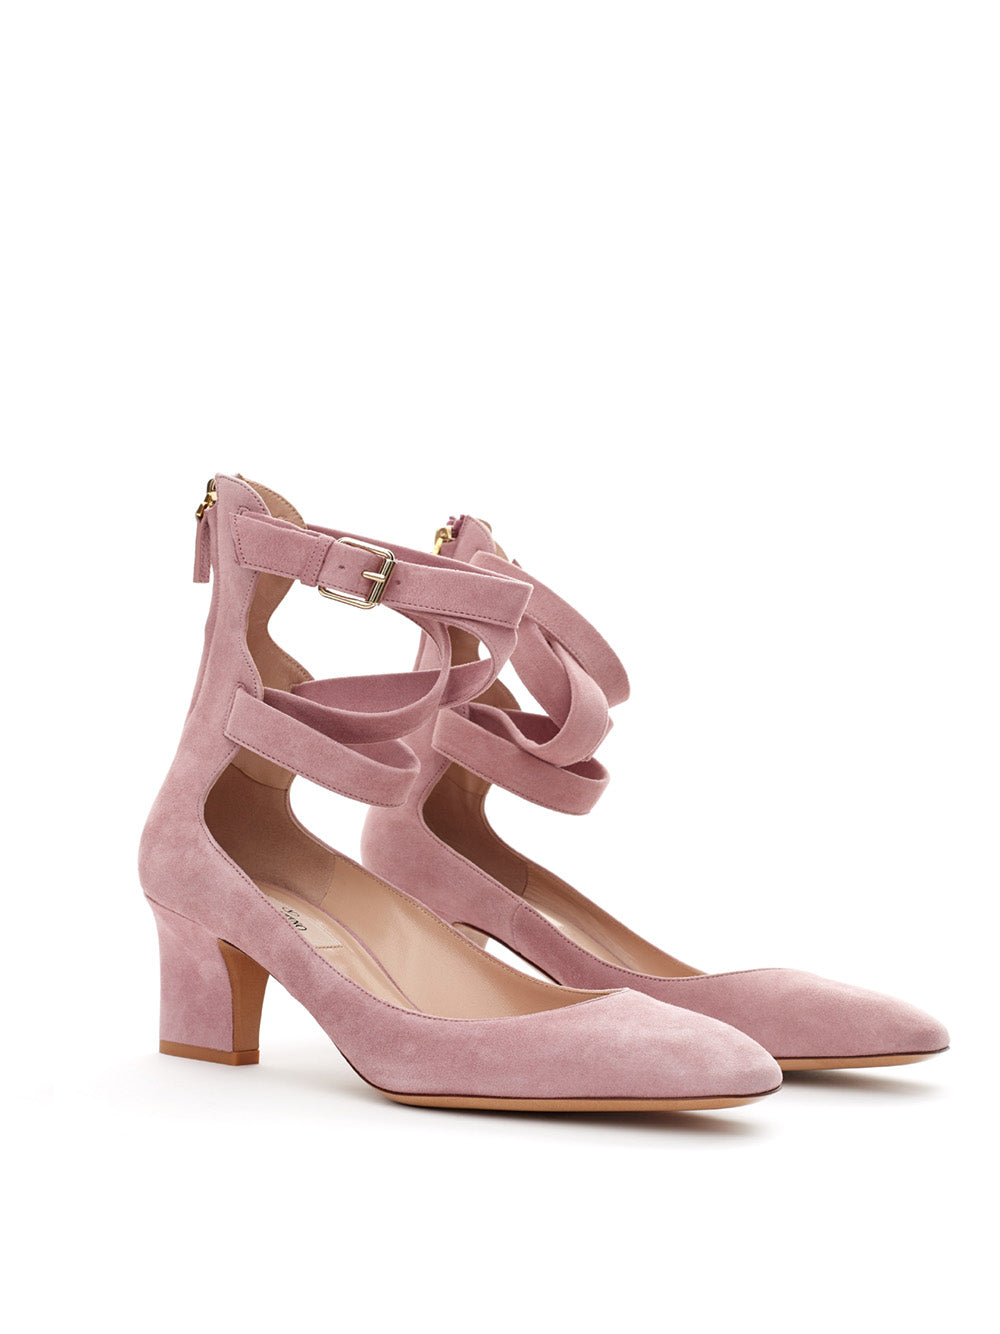 Valentino Ankle Strap Suede Sandals